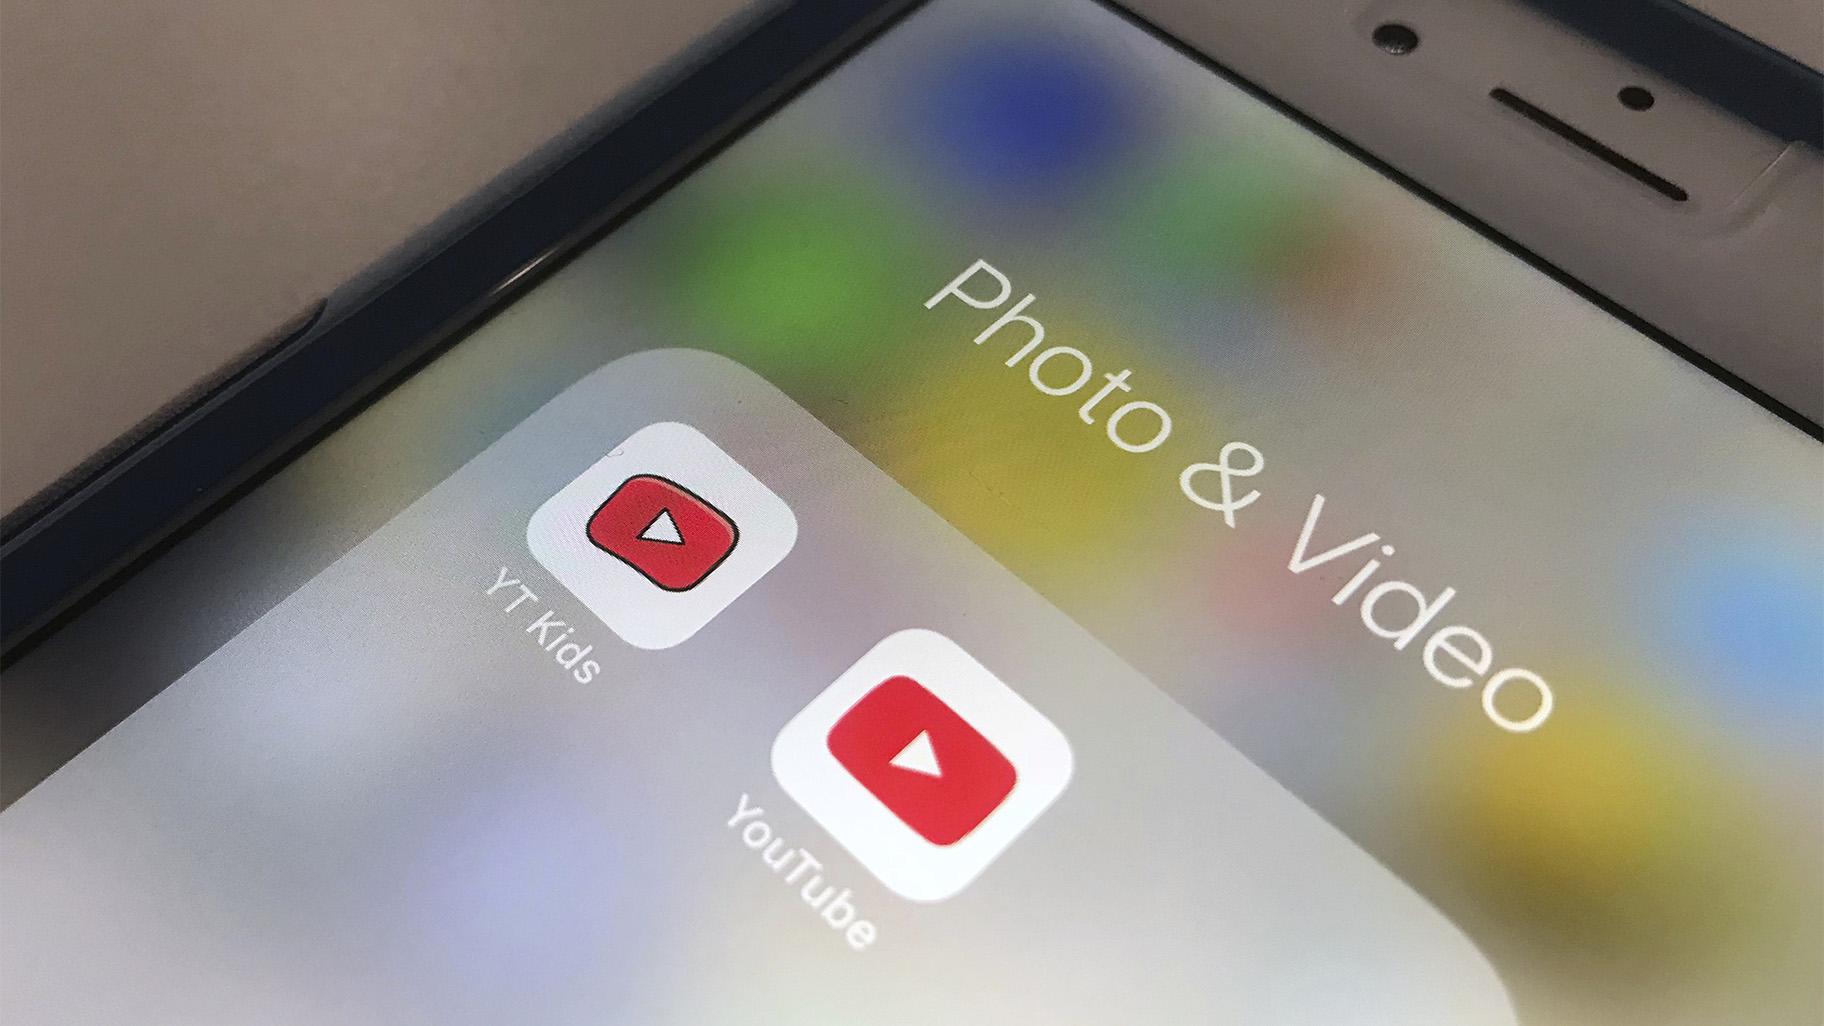 In a letter sent Tuesday, April 6, 2021, to YouTube CEO Susan Wojcicki, the House Oversight and Reform subcommittee on economic and consumer policy says YouTube isn't doing enough to protect kids from material that could harm them. (AP Photo / Jenny Kane, File)